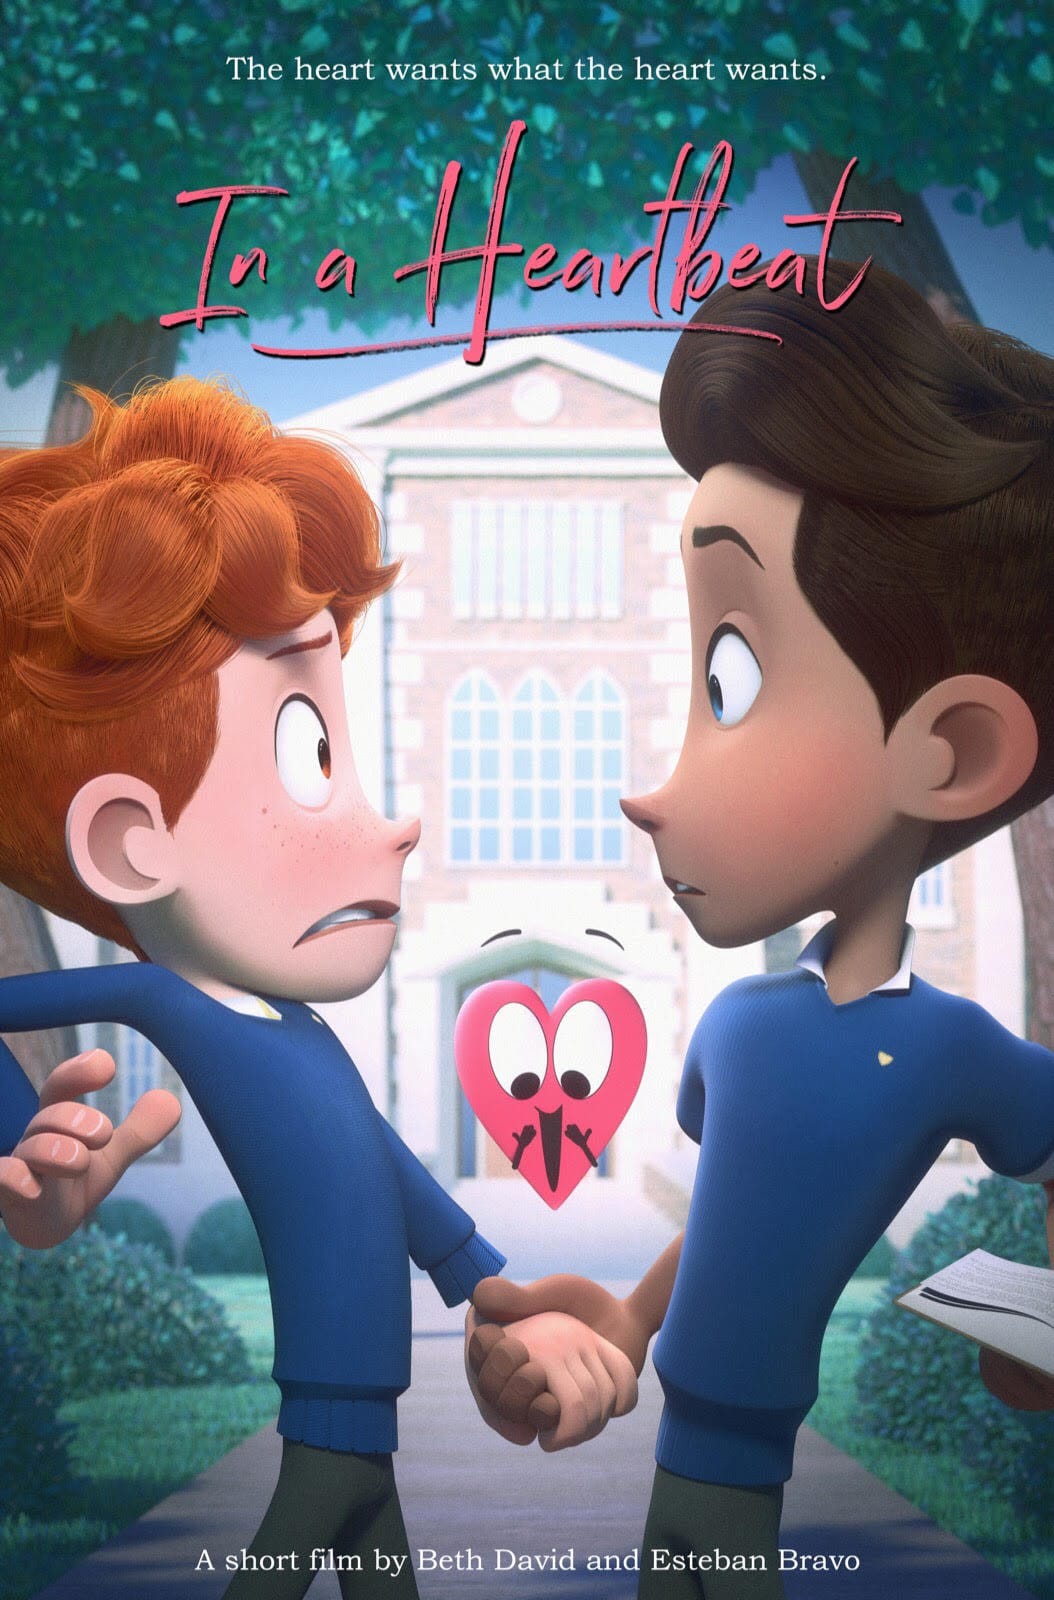 In a Heartbeat is a beautiful animated short film